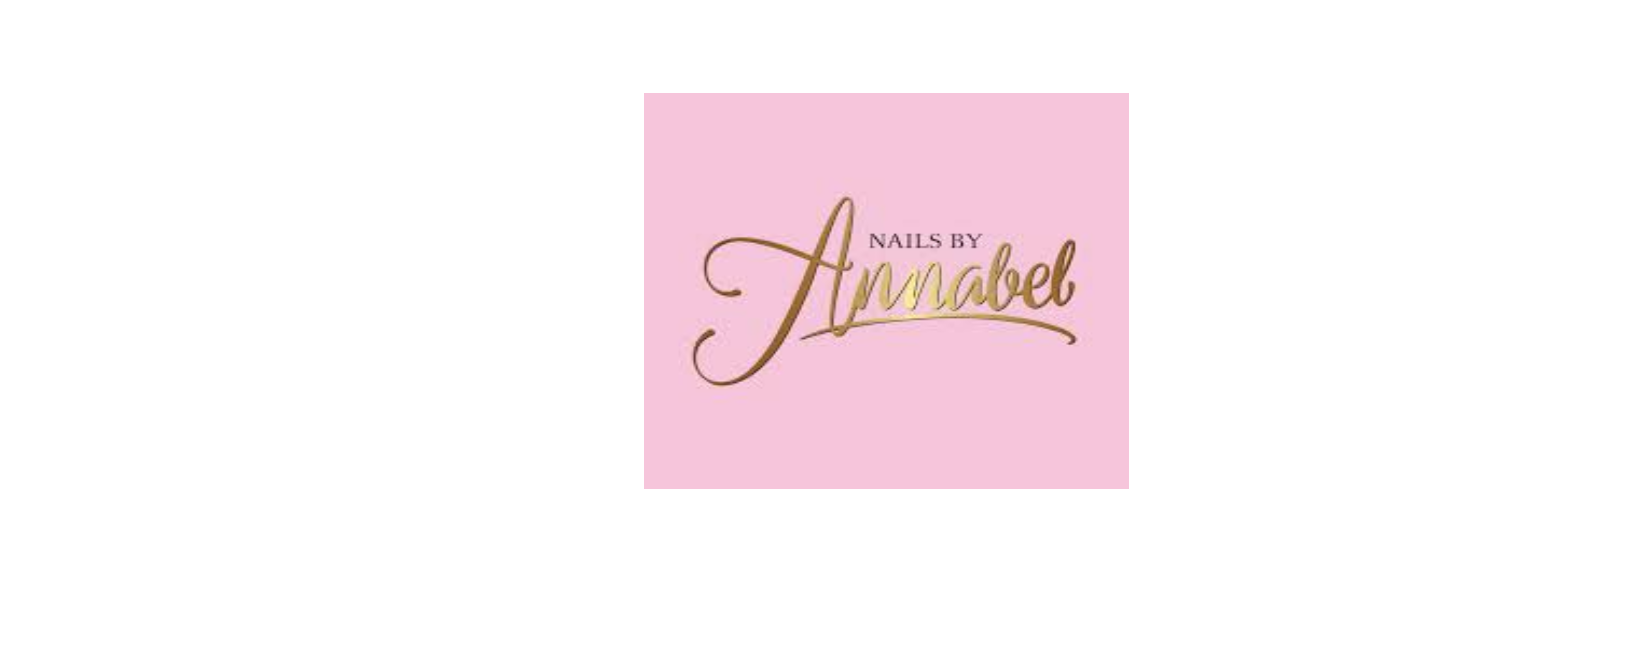 nails by annabel Discount Code 2022